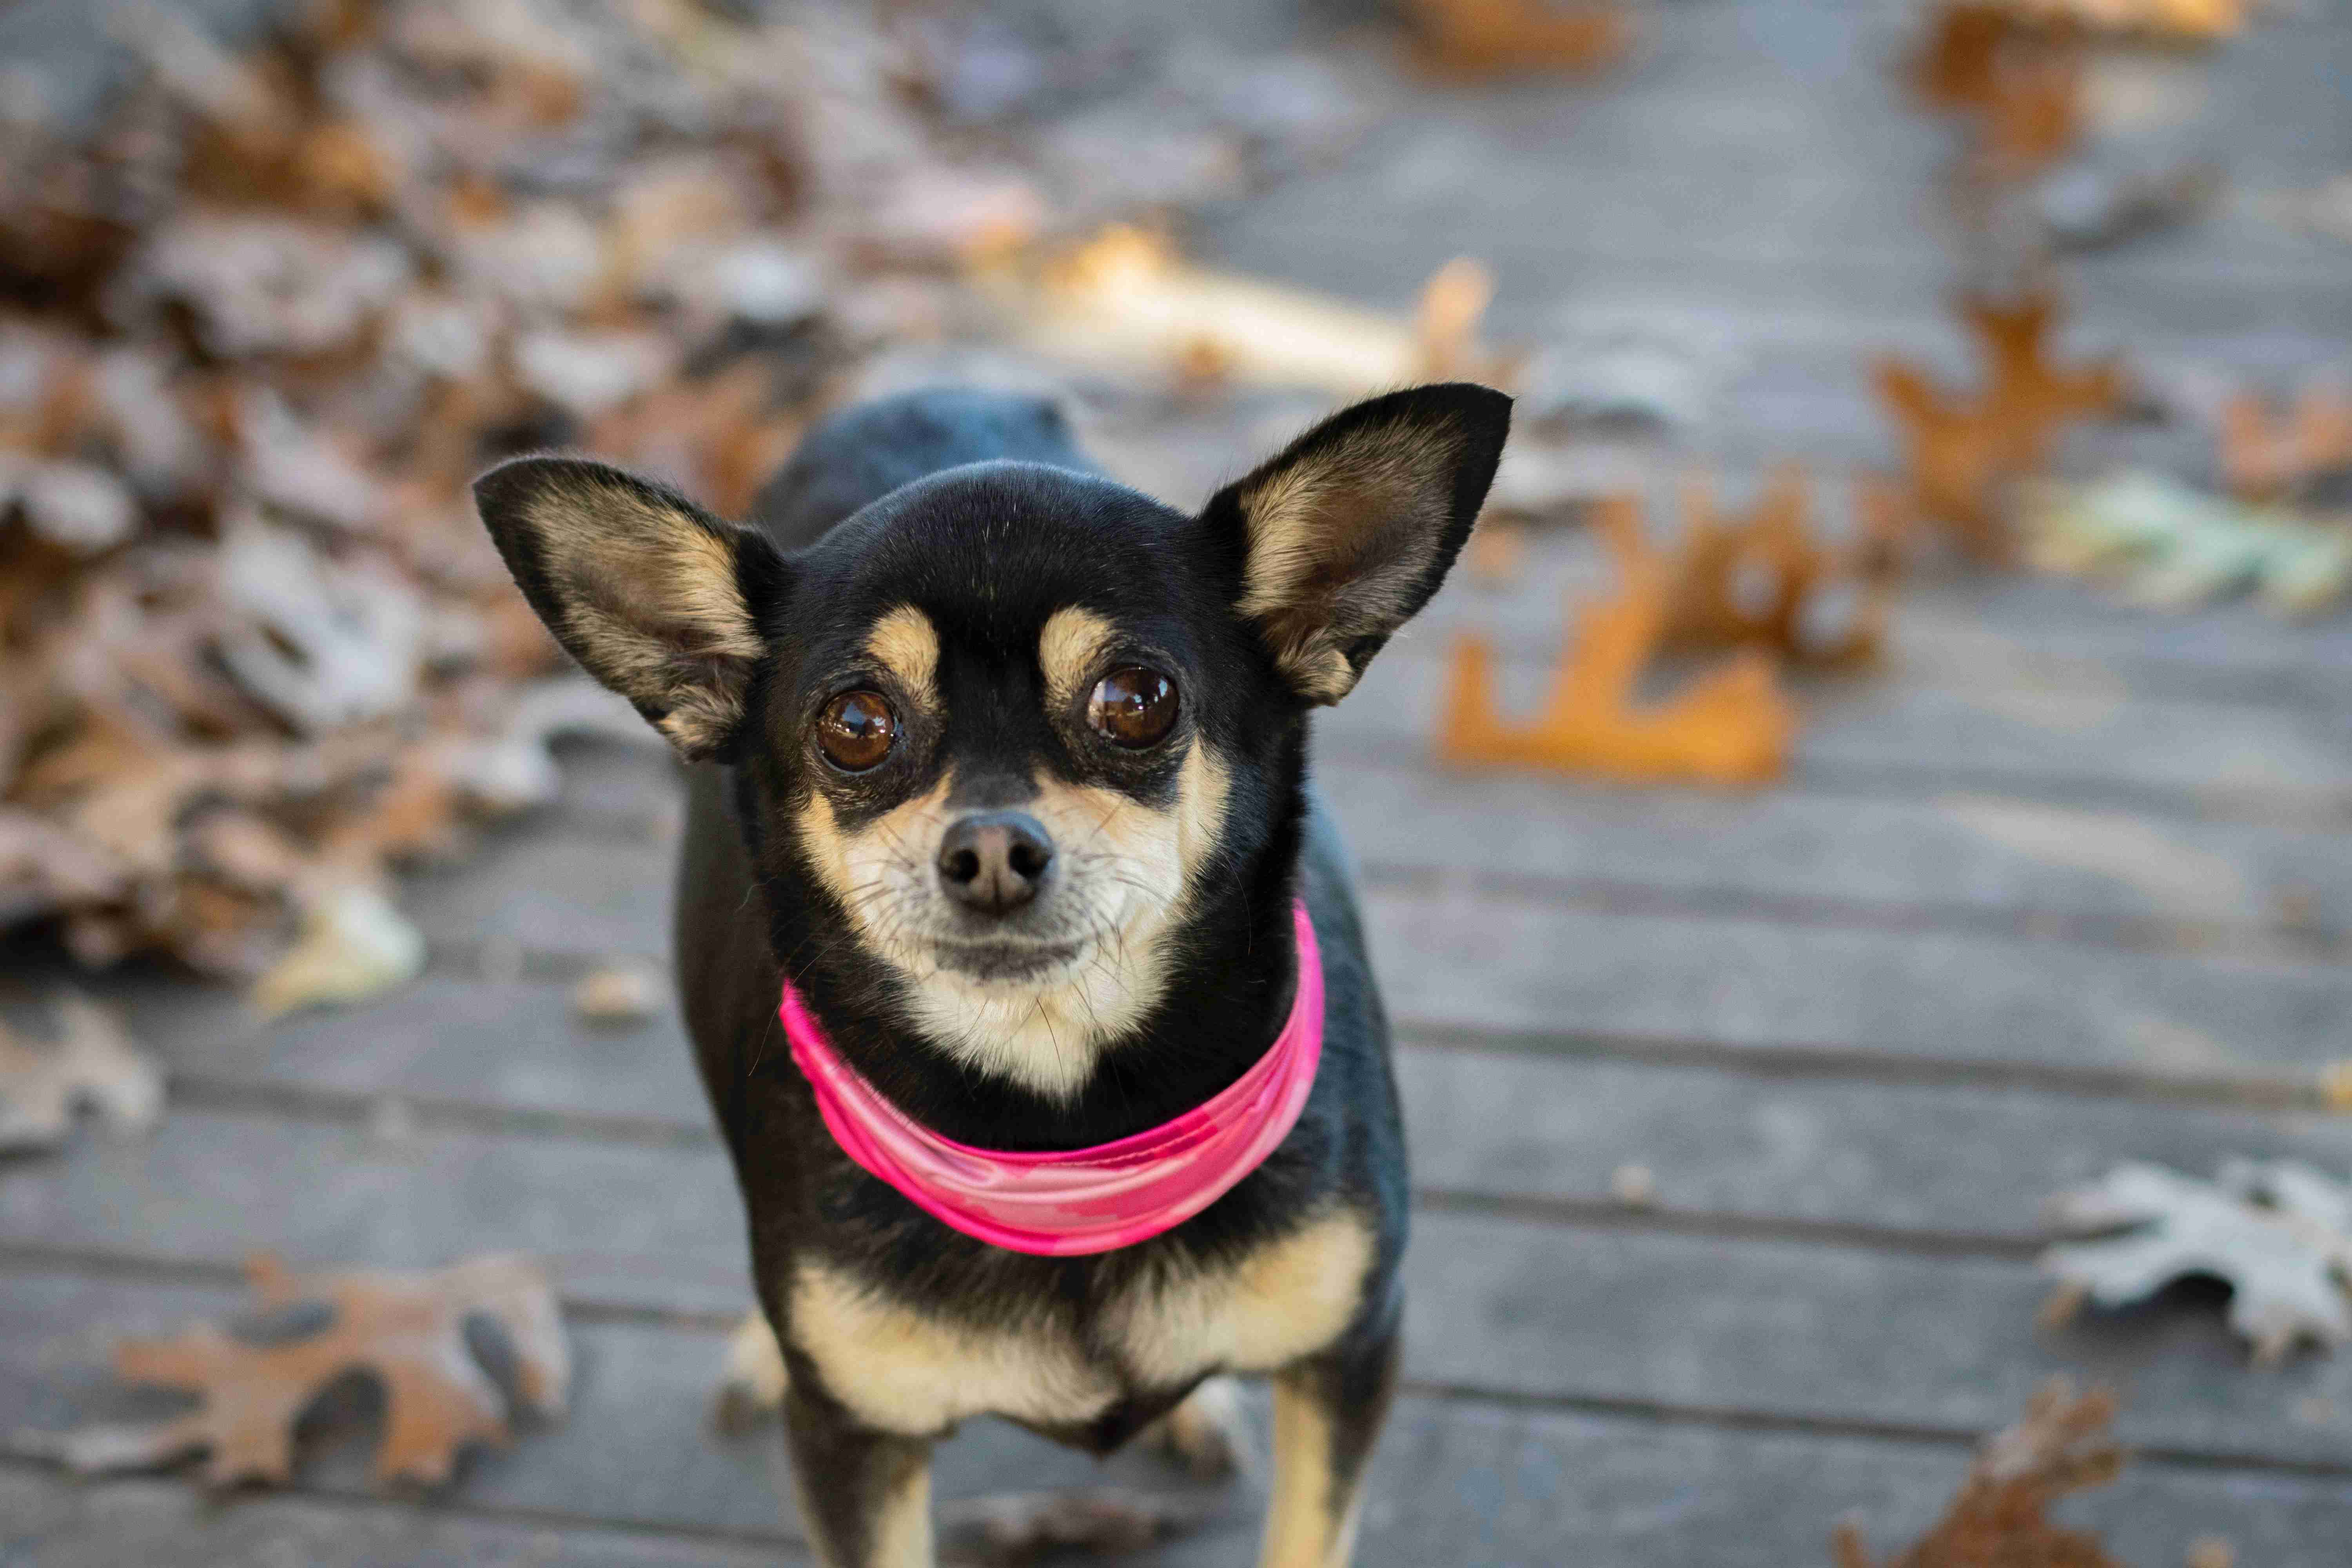 How can I socialize my Chihuahua to prevent aggression?